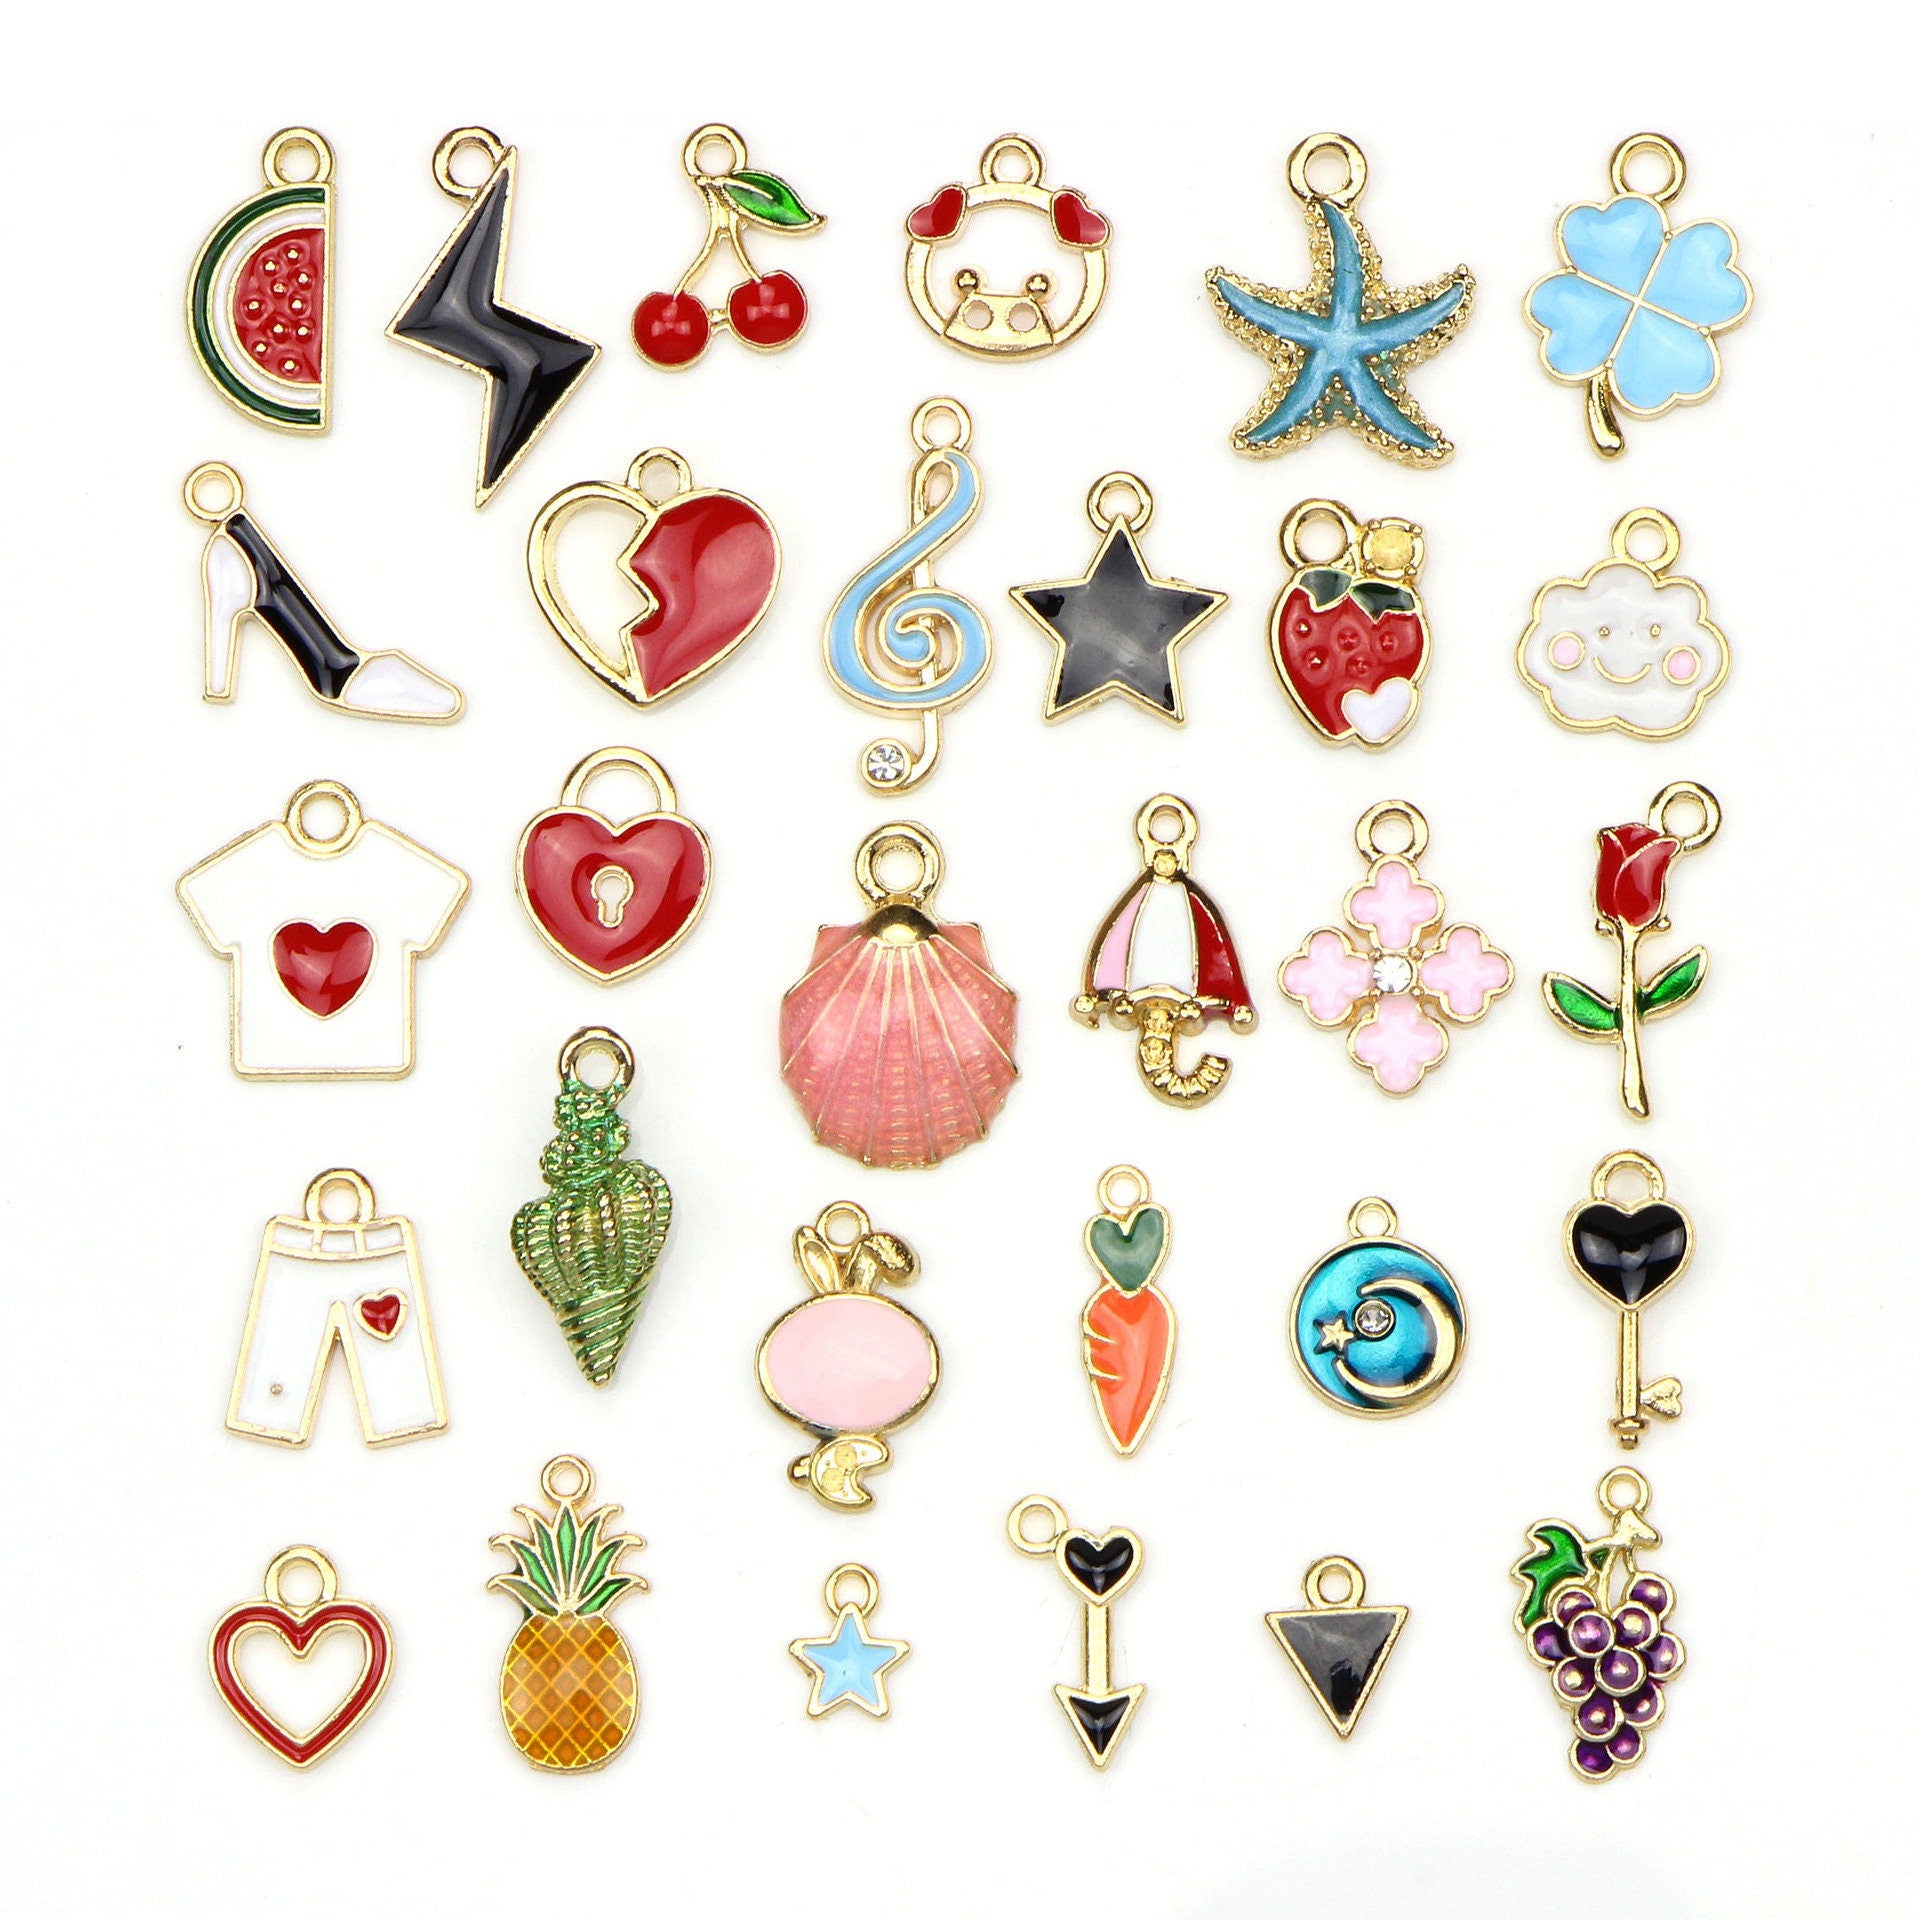  HONBAY 40PCS Enamel Alloy Red Fruit Charms Pendant Back to  School Pendants School Best Teacher or Student Charms for Keychains  Earrings Bracelets Necklaces Jewelry Making and DIY Crafts : Arts, Crafts